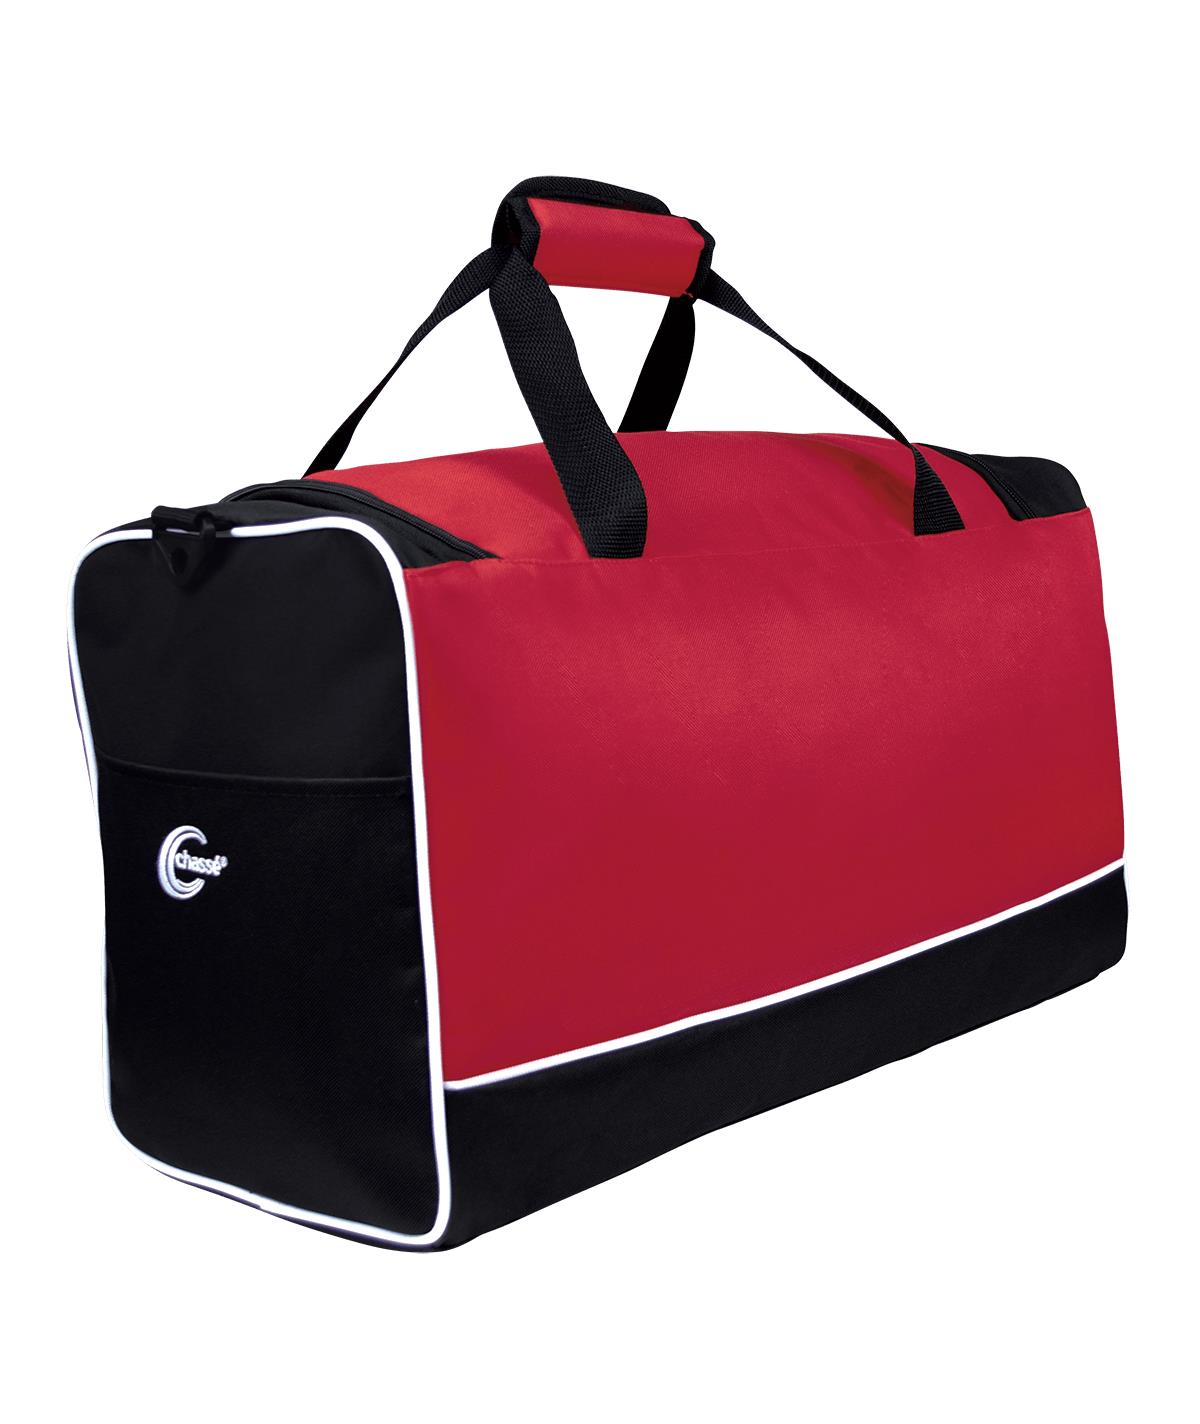 Chasse Master Duffle Bag